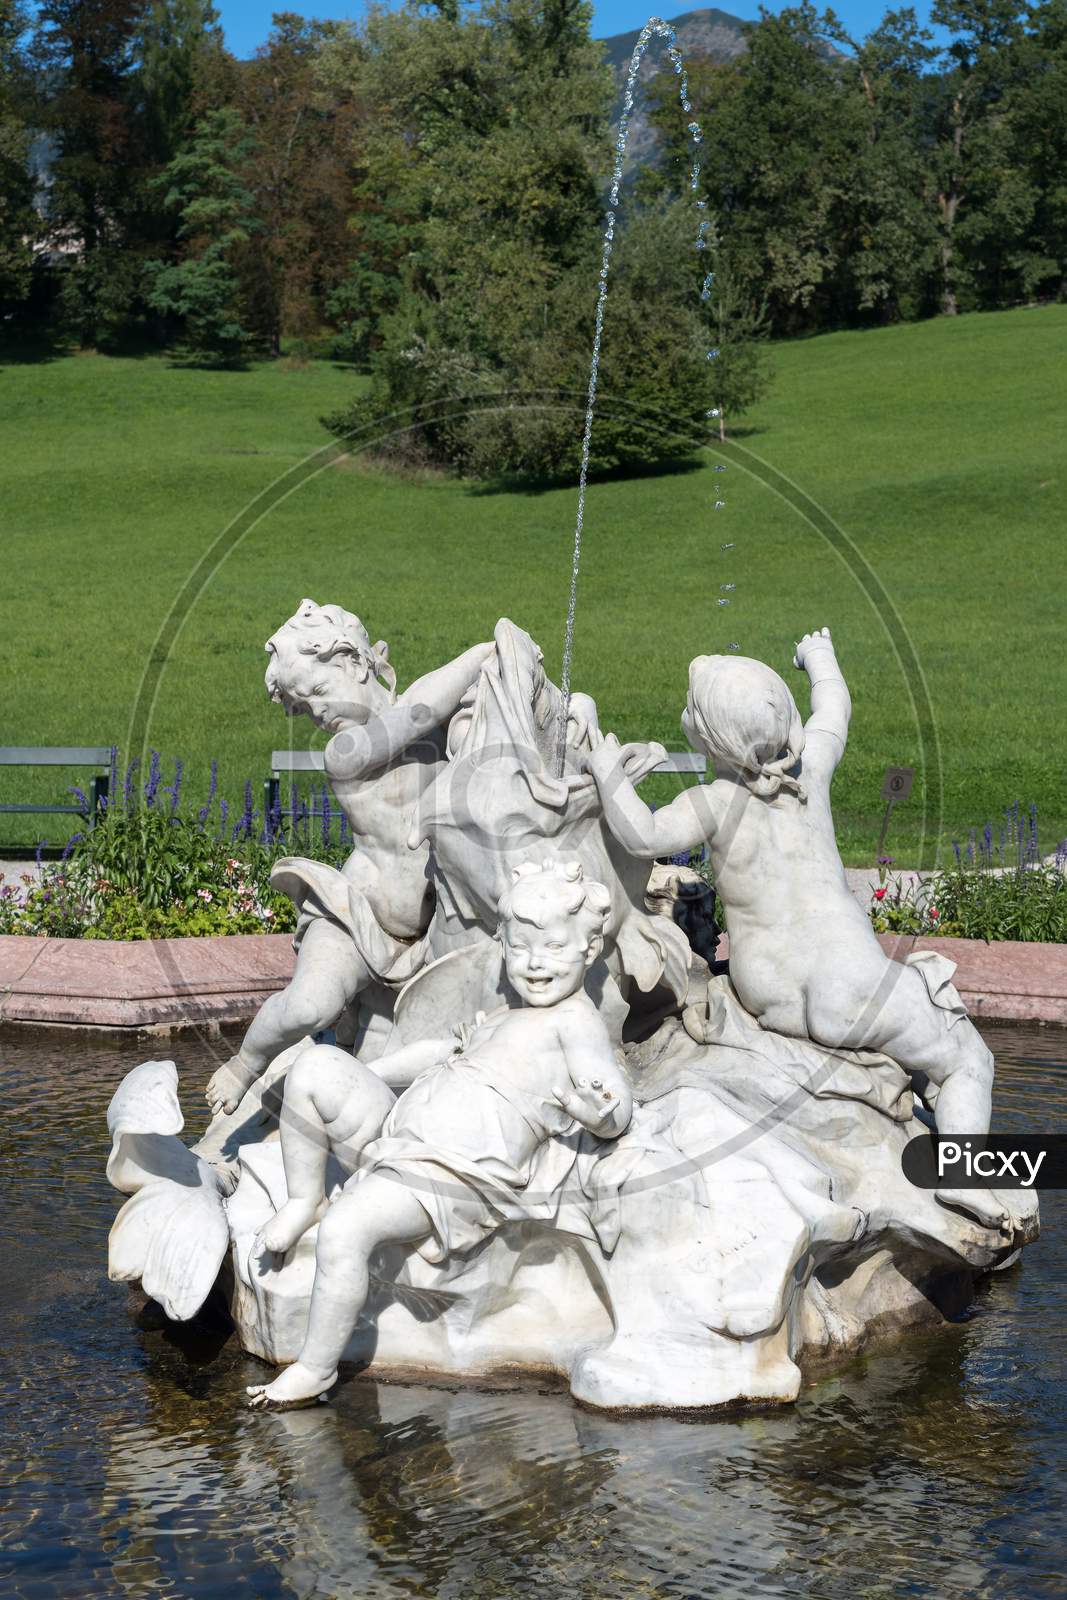 Ornamental Statues In A Pond Outside The Imperial Kaiservilla In Bad Ischl